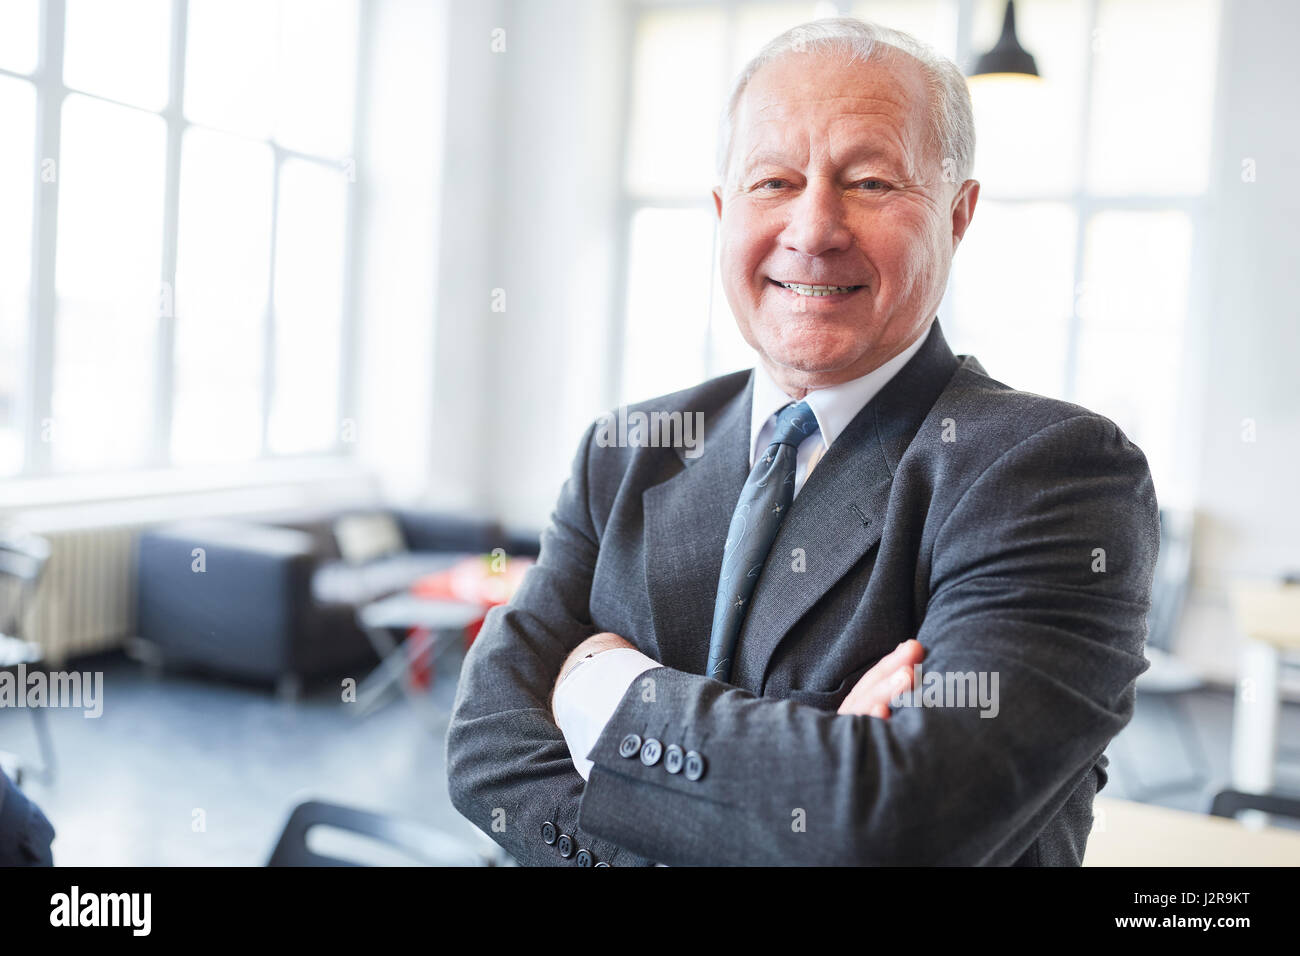 Senior as successful entrepreneur and business manager with self-confidence Stock Photo